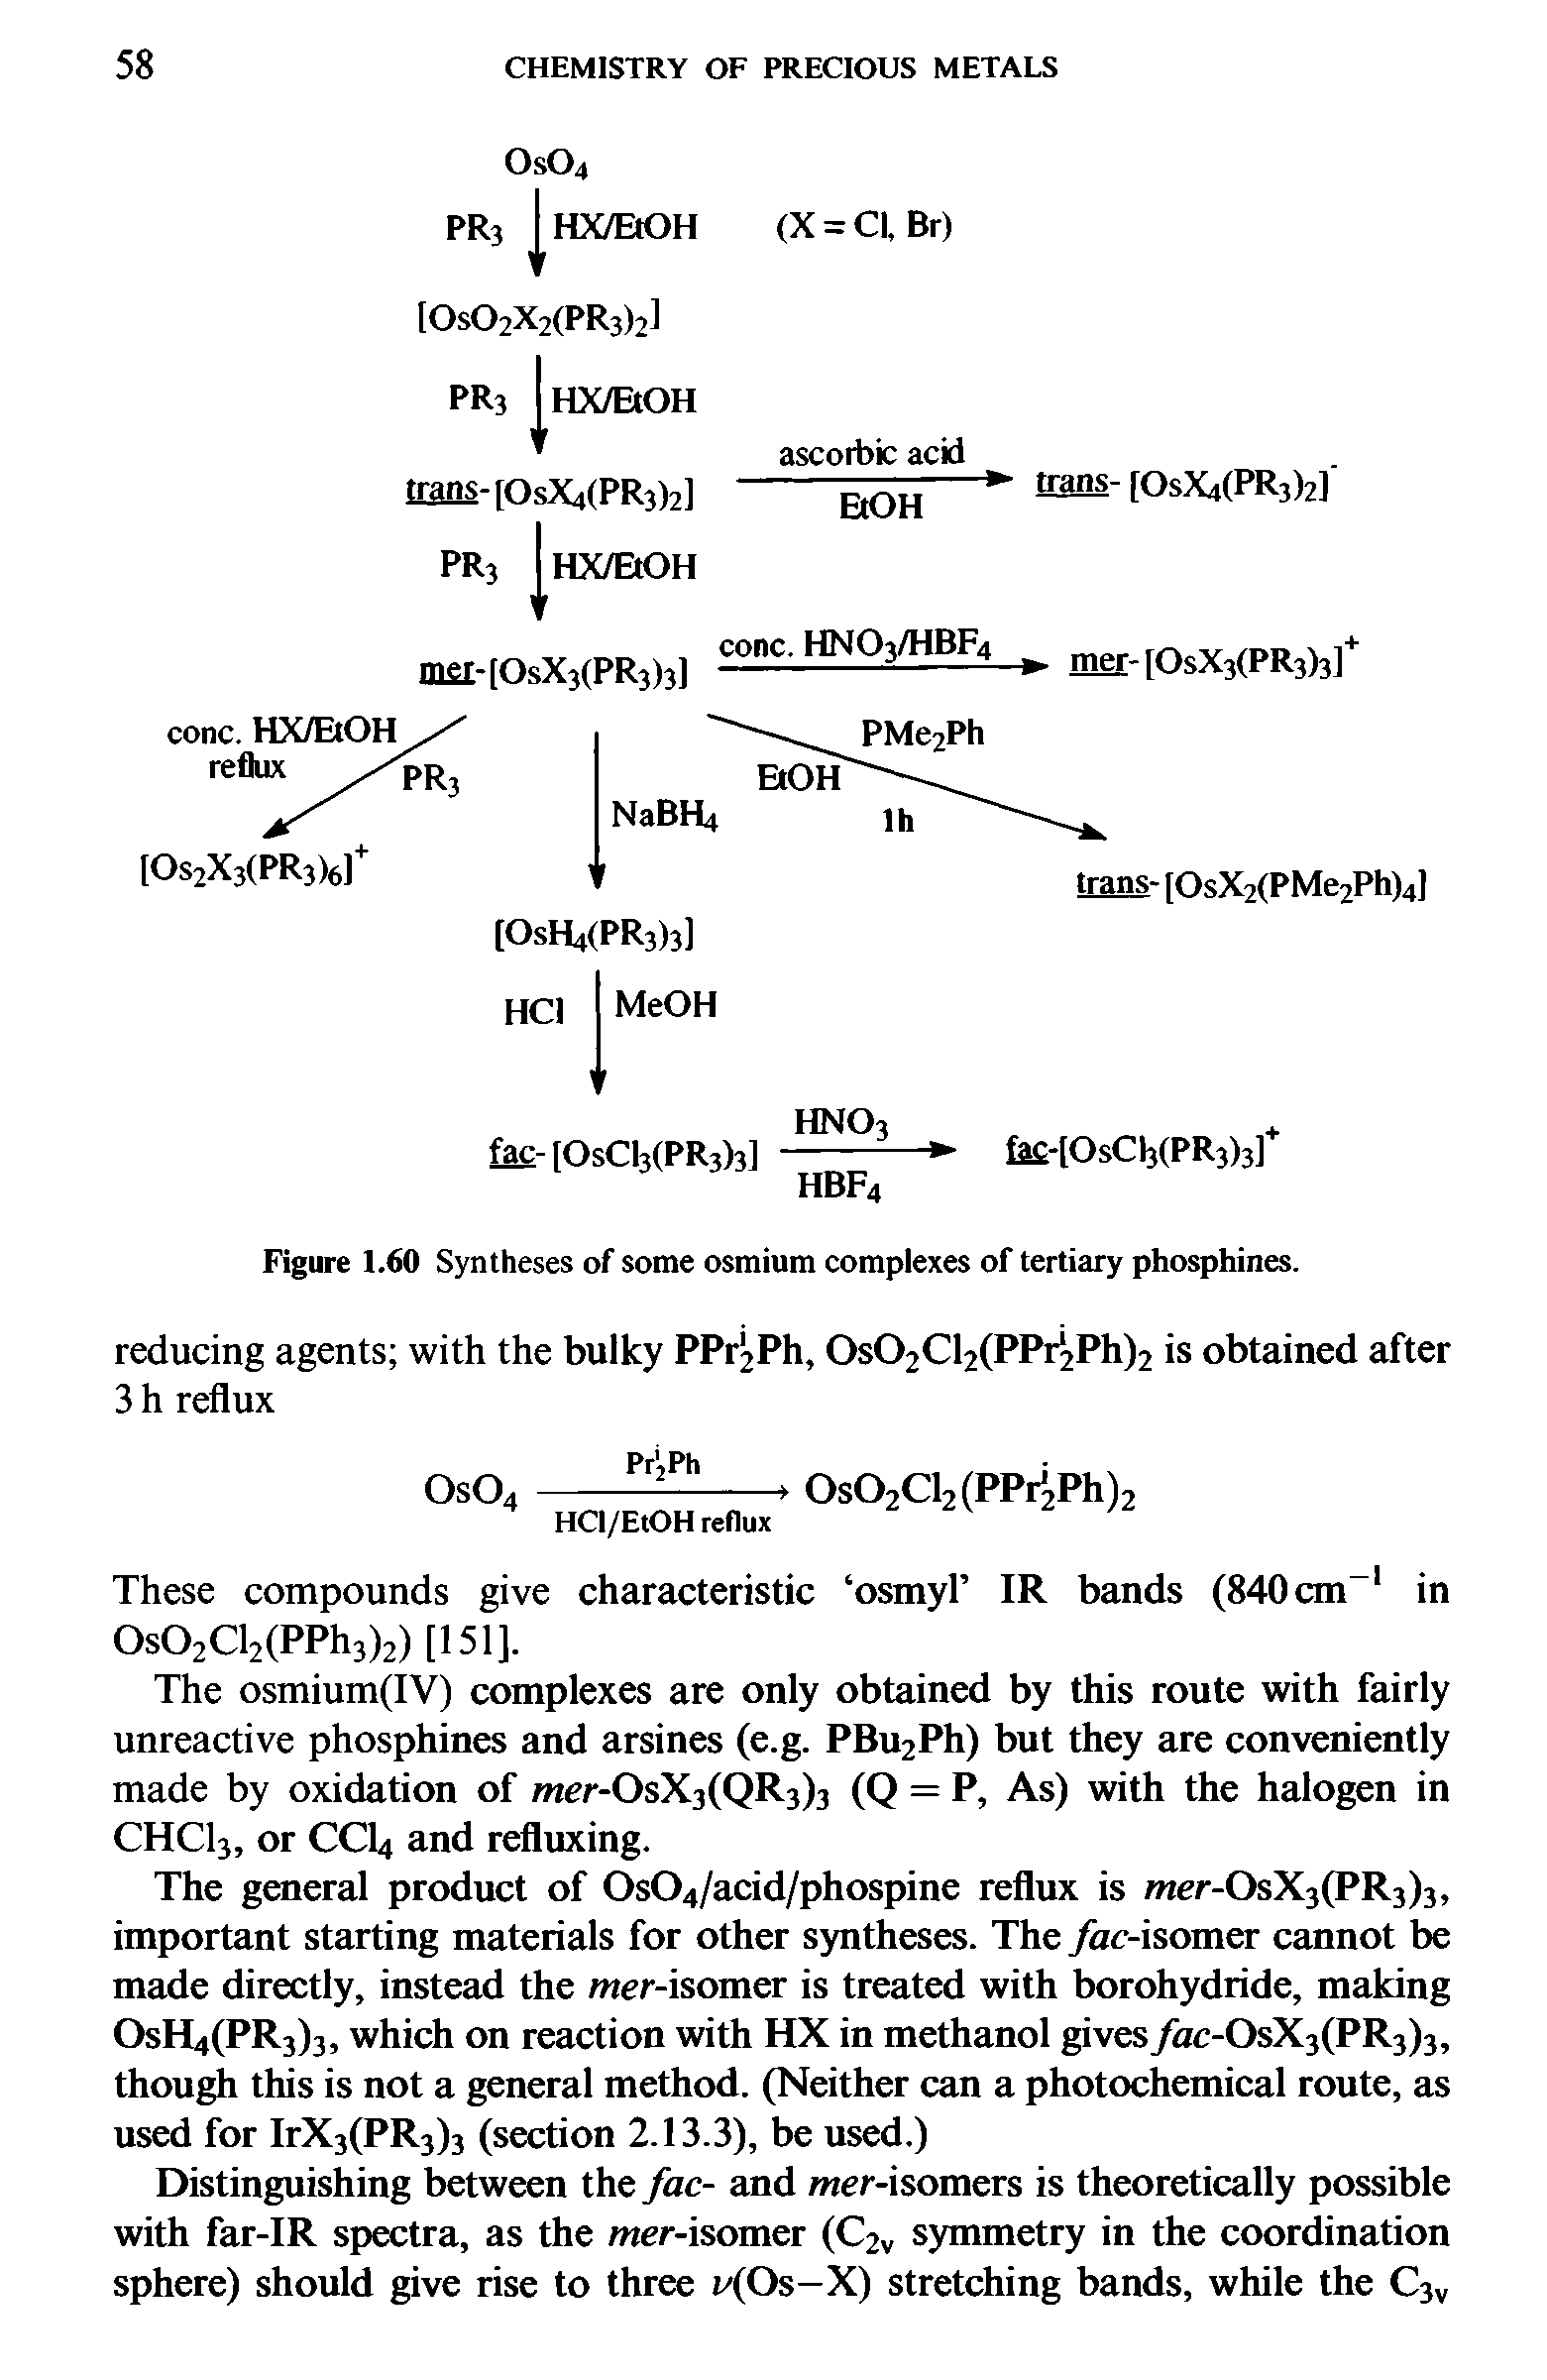 Figure 1.60 Syntheses of some osmium complexes of tertiary phosphines.